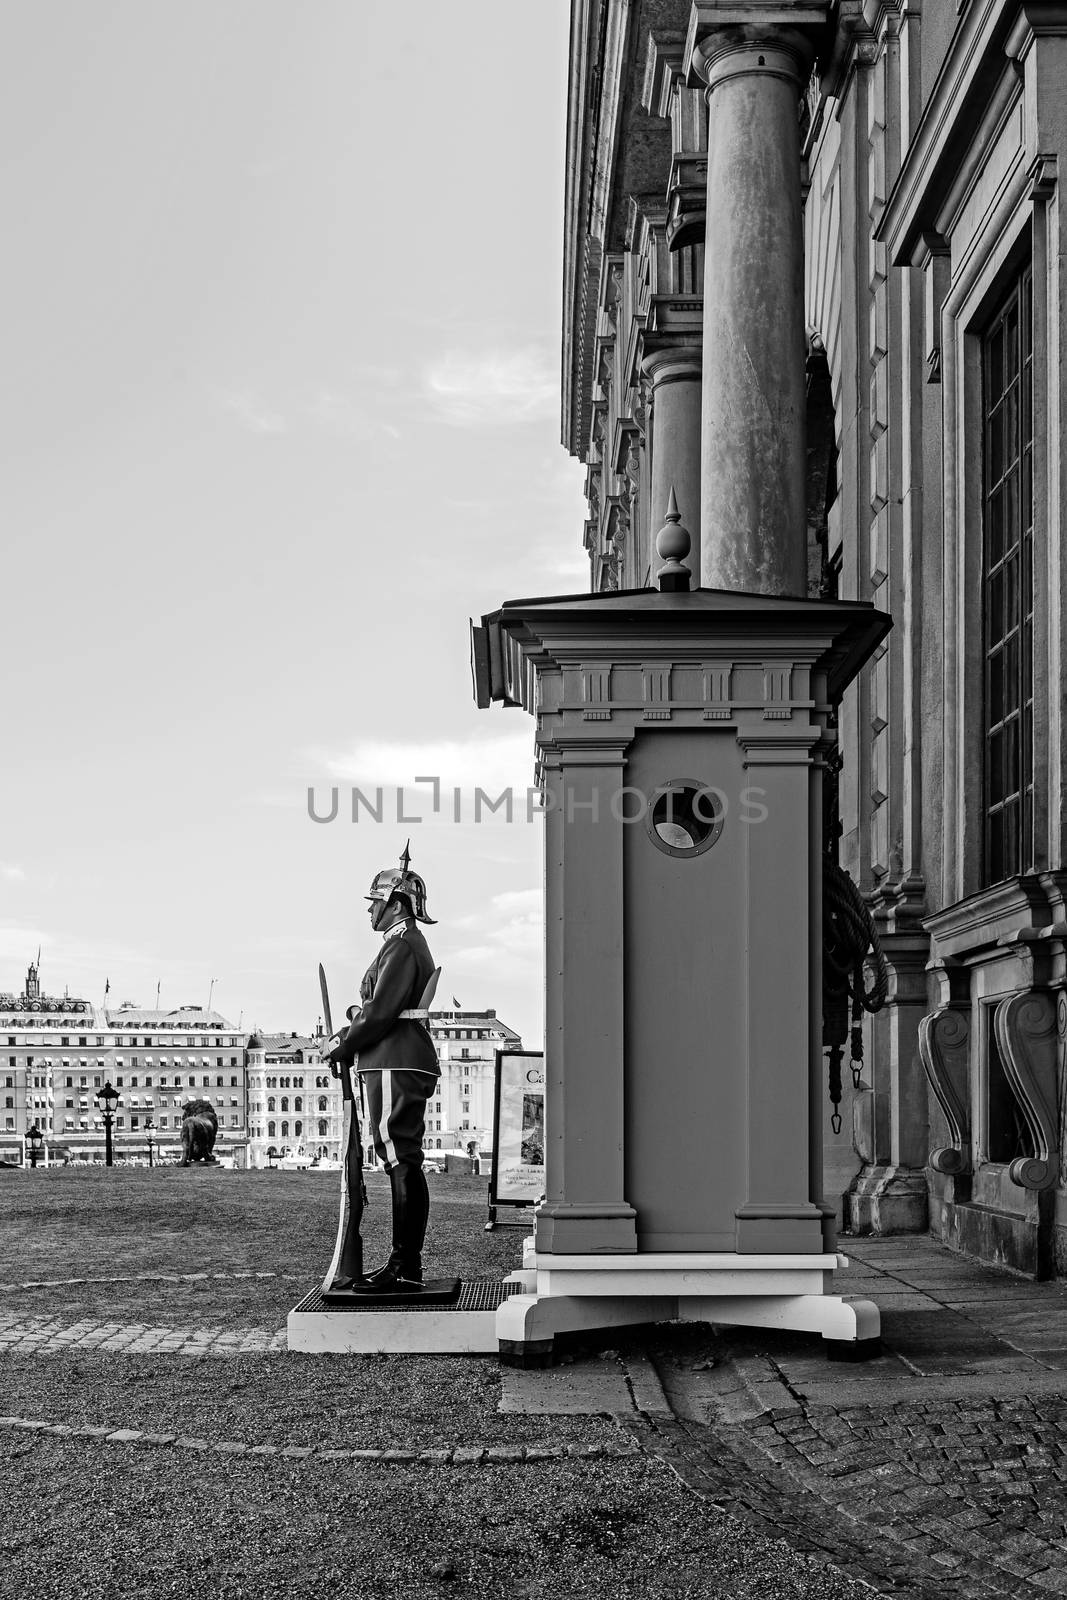 The wardress on duty in front of the Royal Palace in Stockholm. The Royal Guard was established in 1523 and continuously guards the Royal Palace since then.